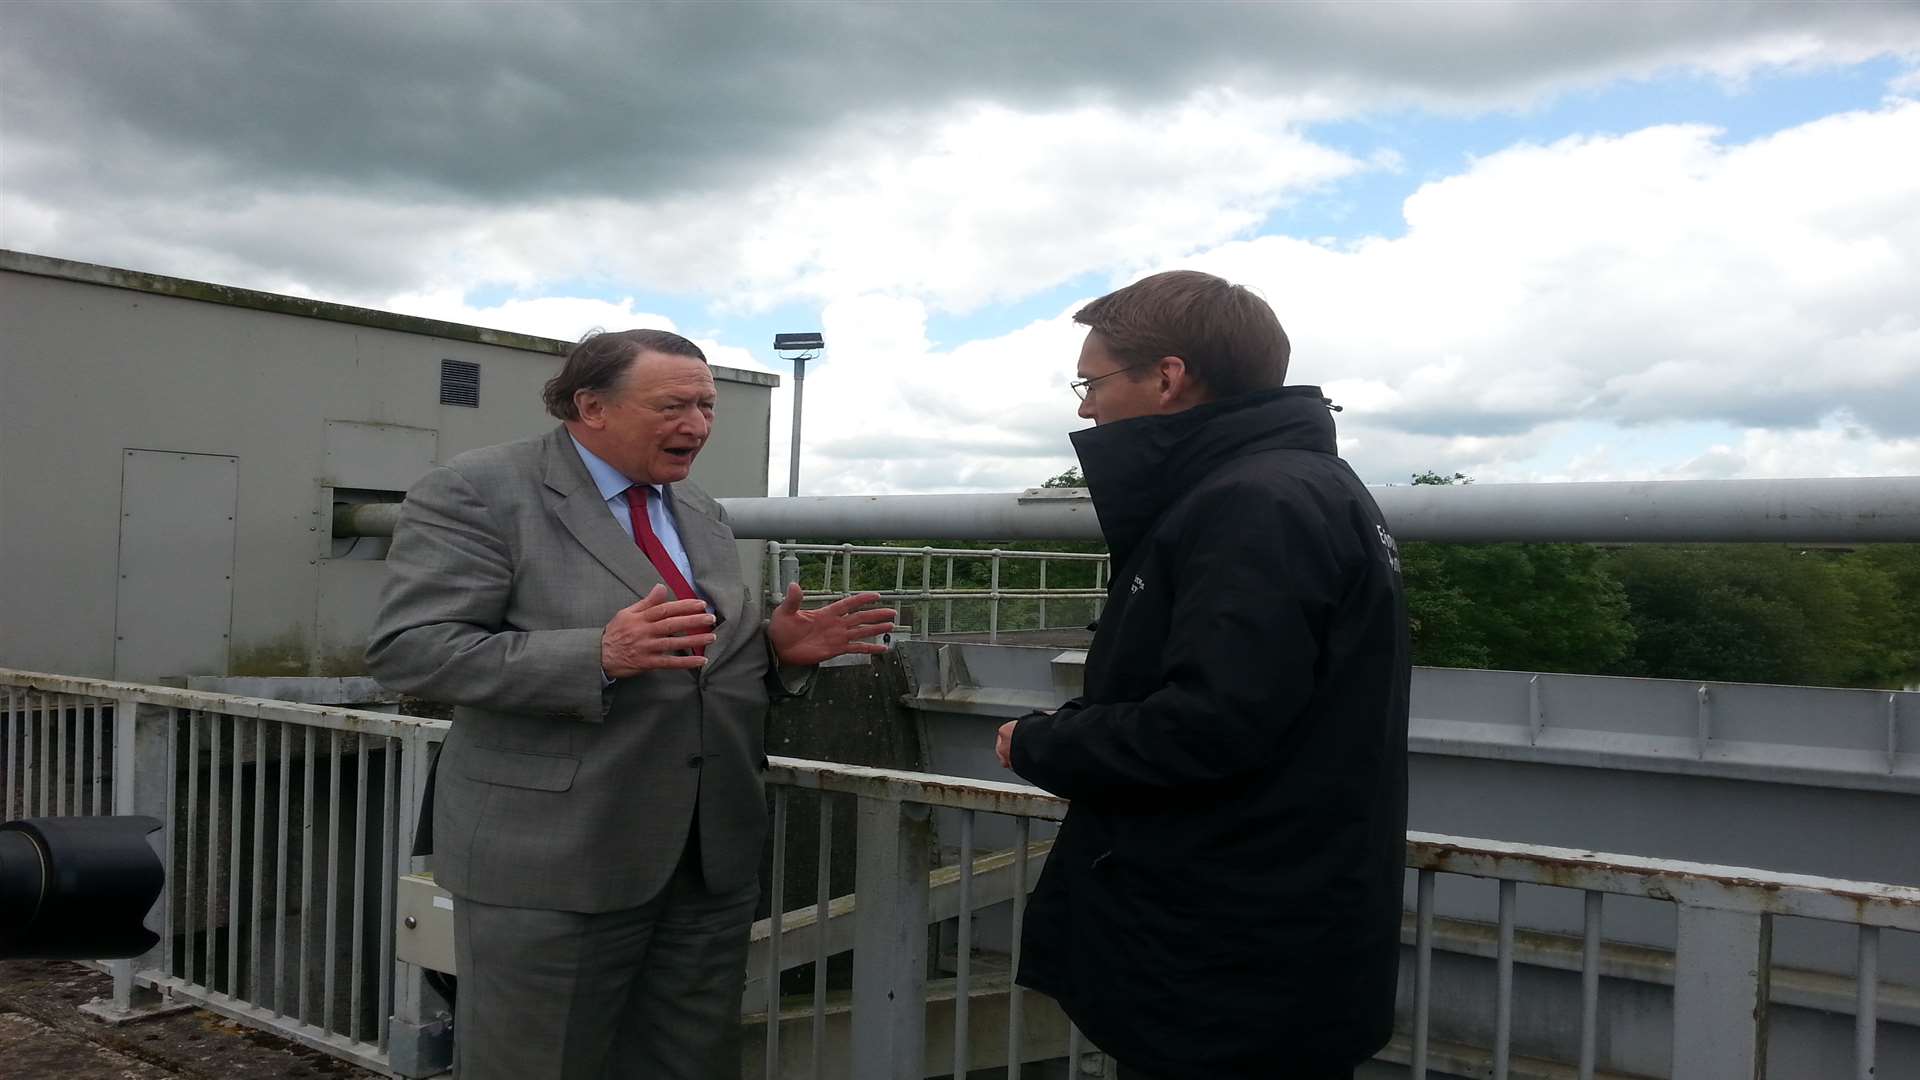 Sir John Stanley, MP for Tonbridge and Malling, with Andrew Pearce, area manager for the Environment Agency